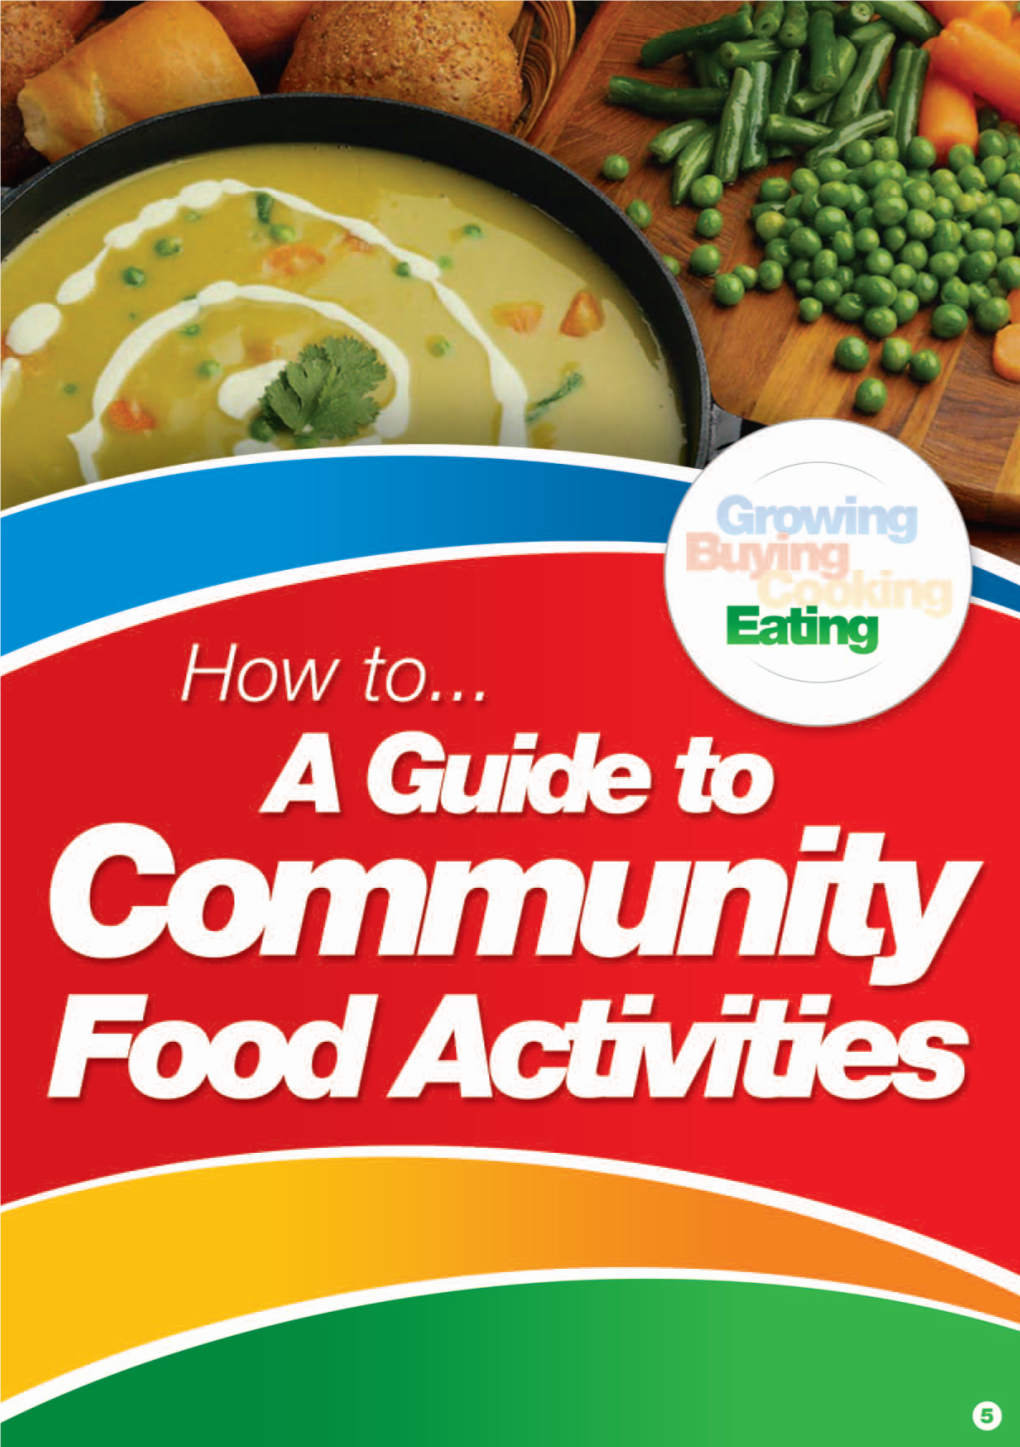 A Guide to Community Food Activities If You Would Like This Pamphlet in a Different Format Or in Welsh, Please Contact Swansea Public Health Team on 01792 784858